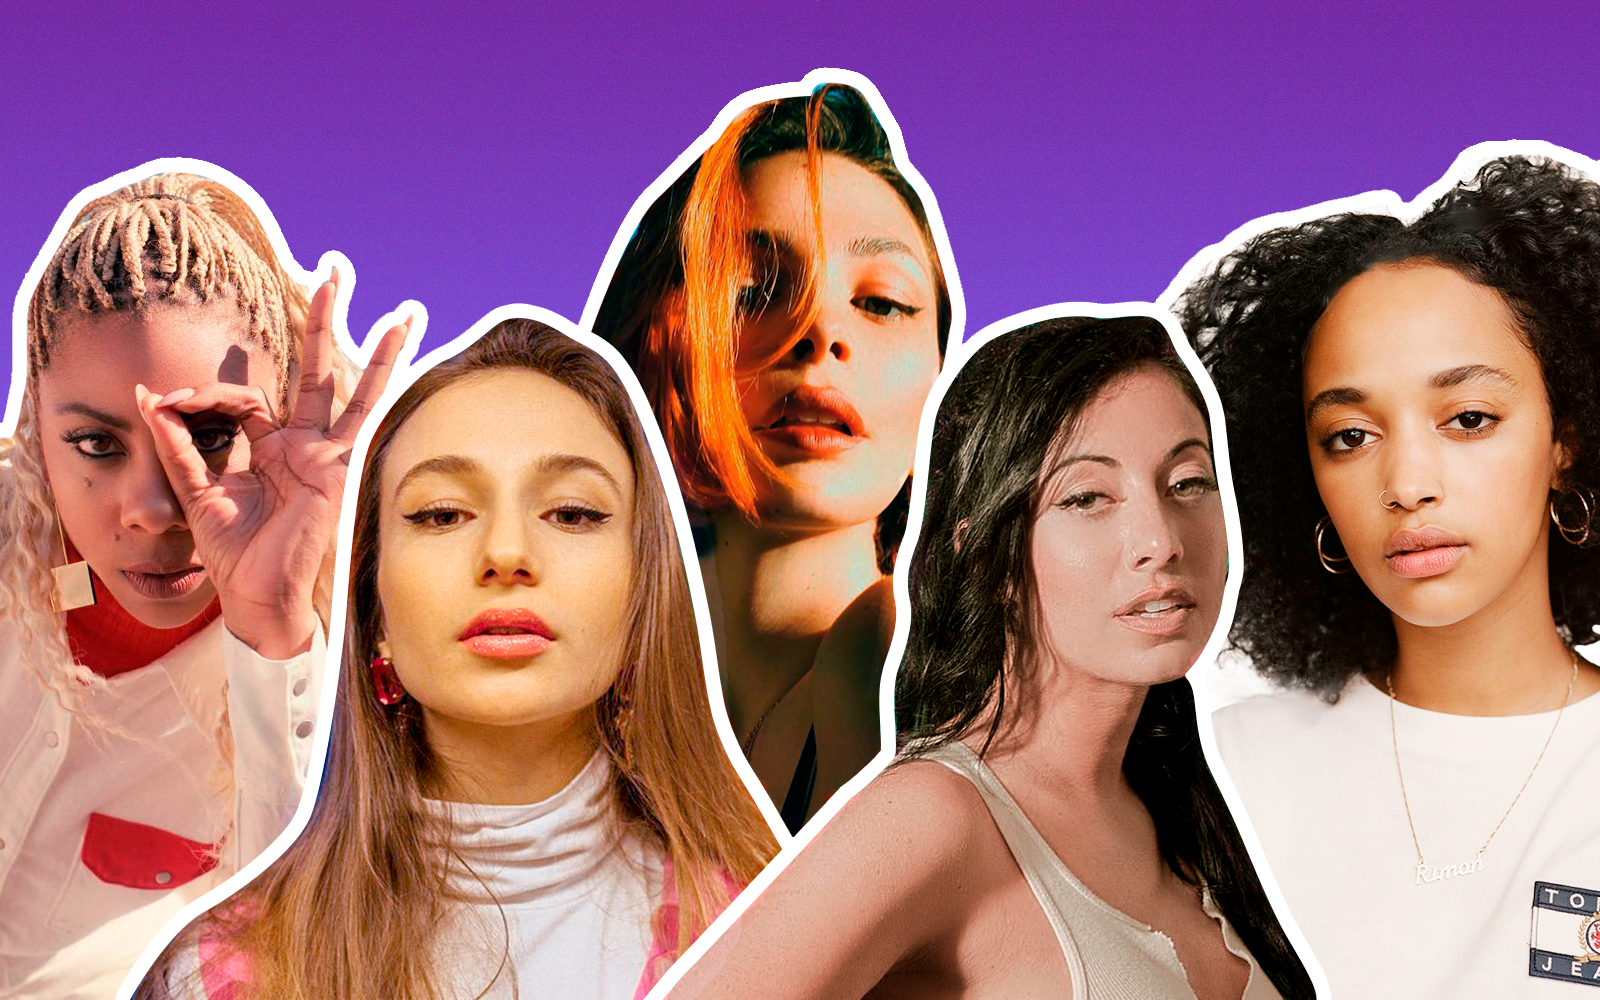 5 emerging female artists to keep an eye on With different styles but a passion in common, they are shaping the contemporary music scene